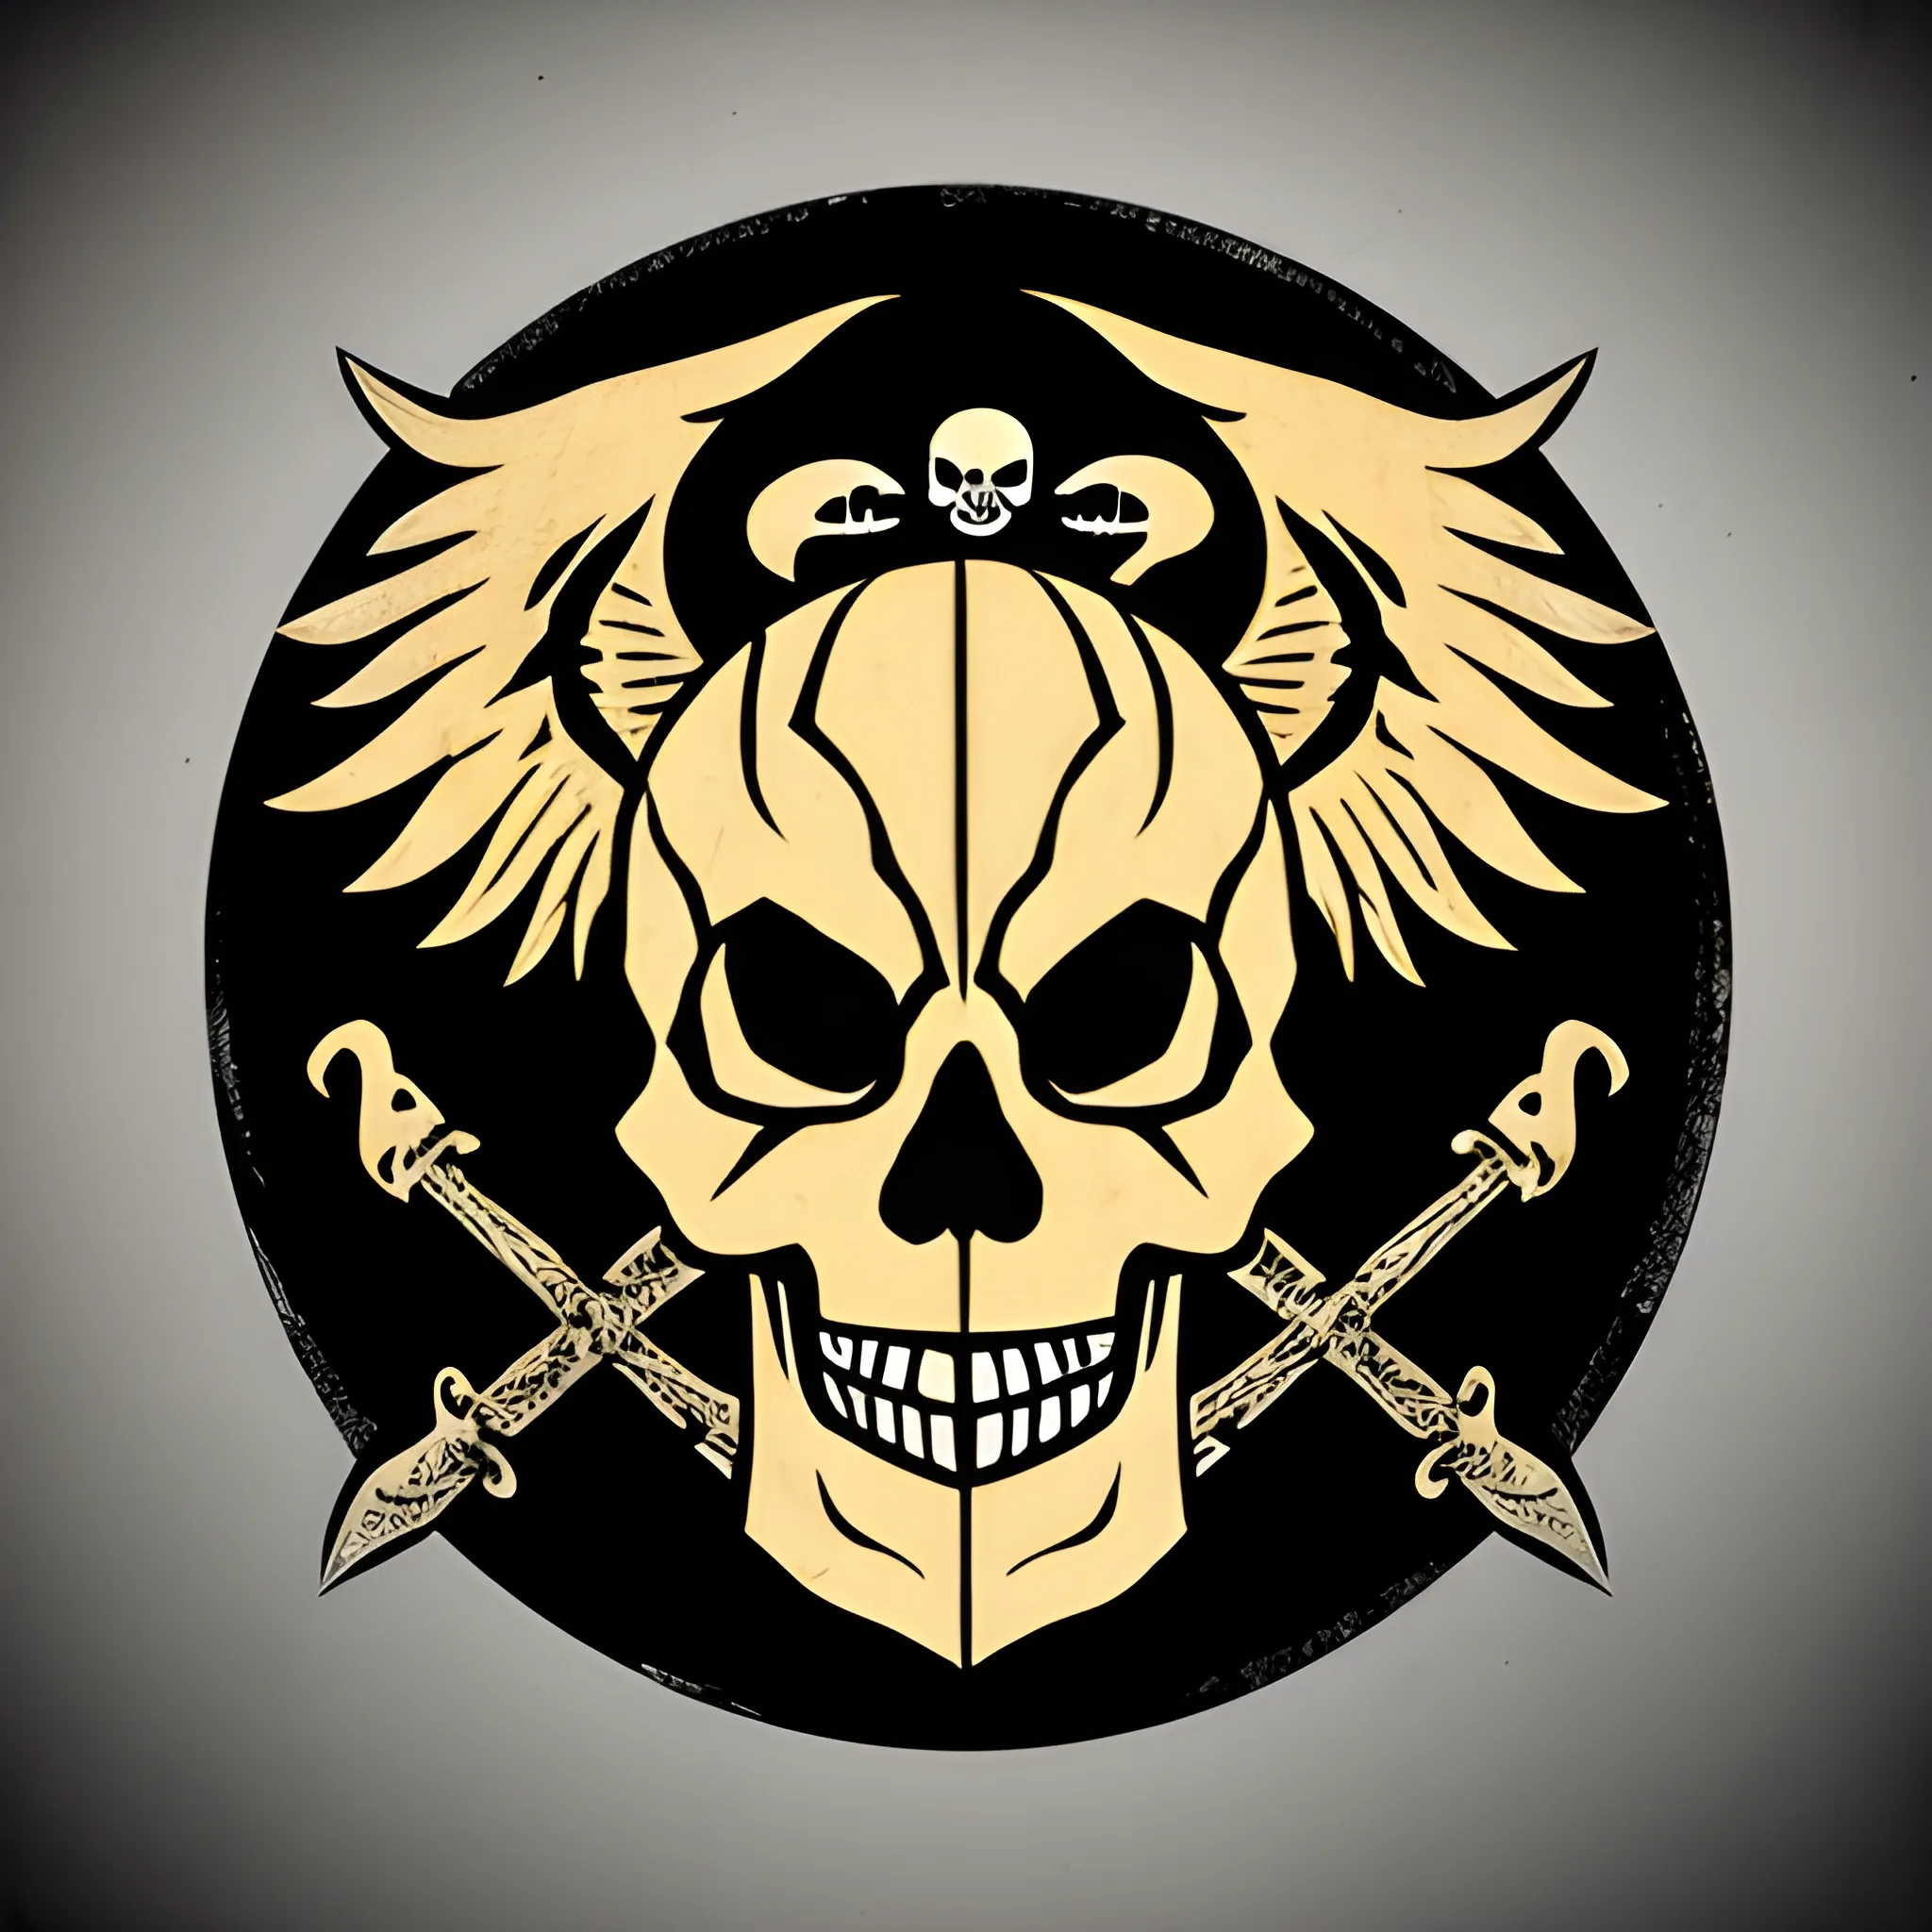 Skull pirate logo with a griffin 